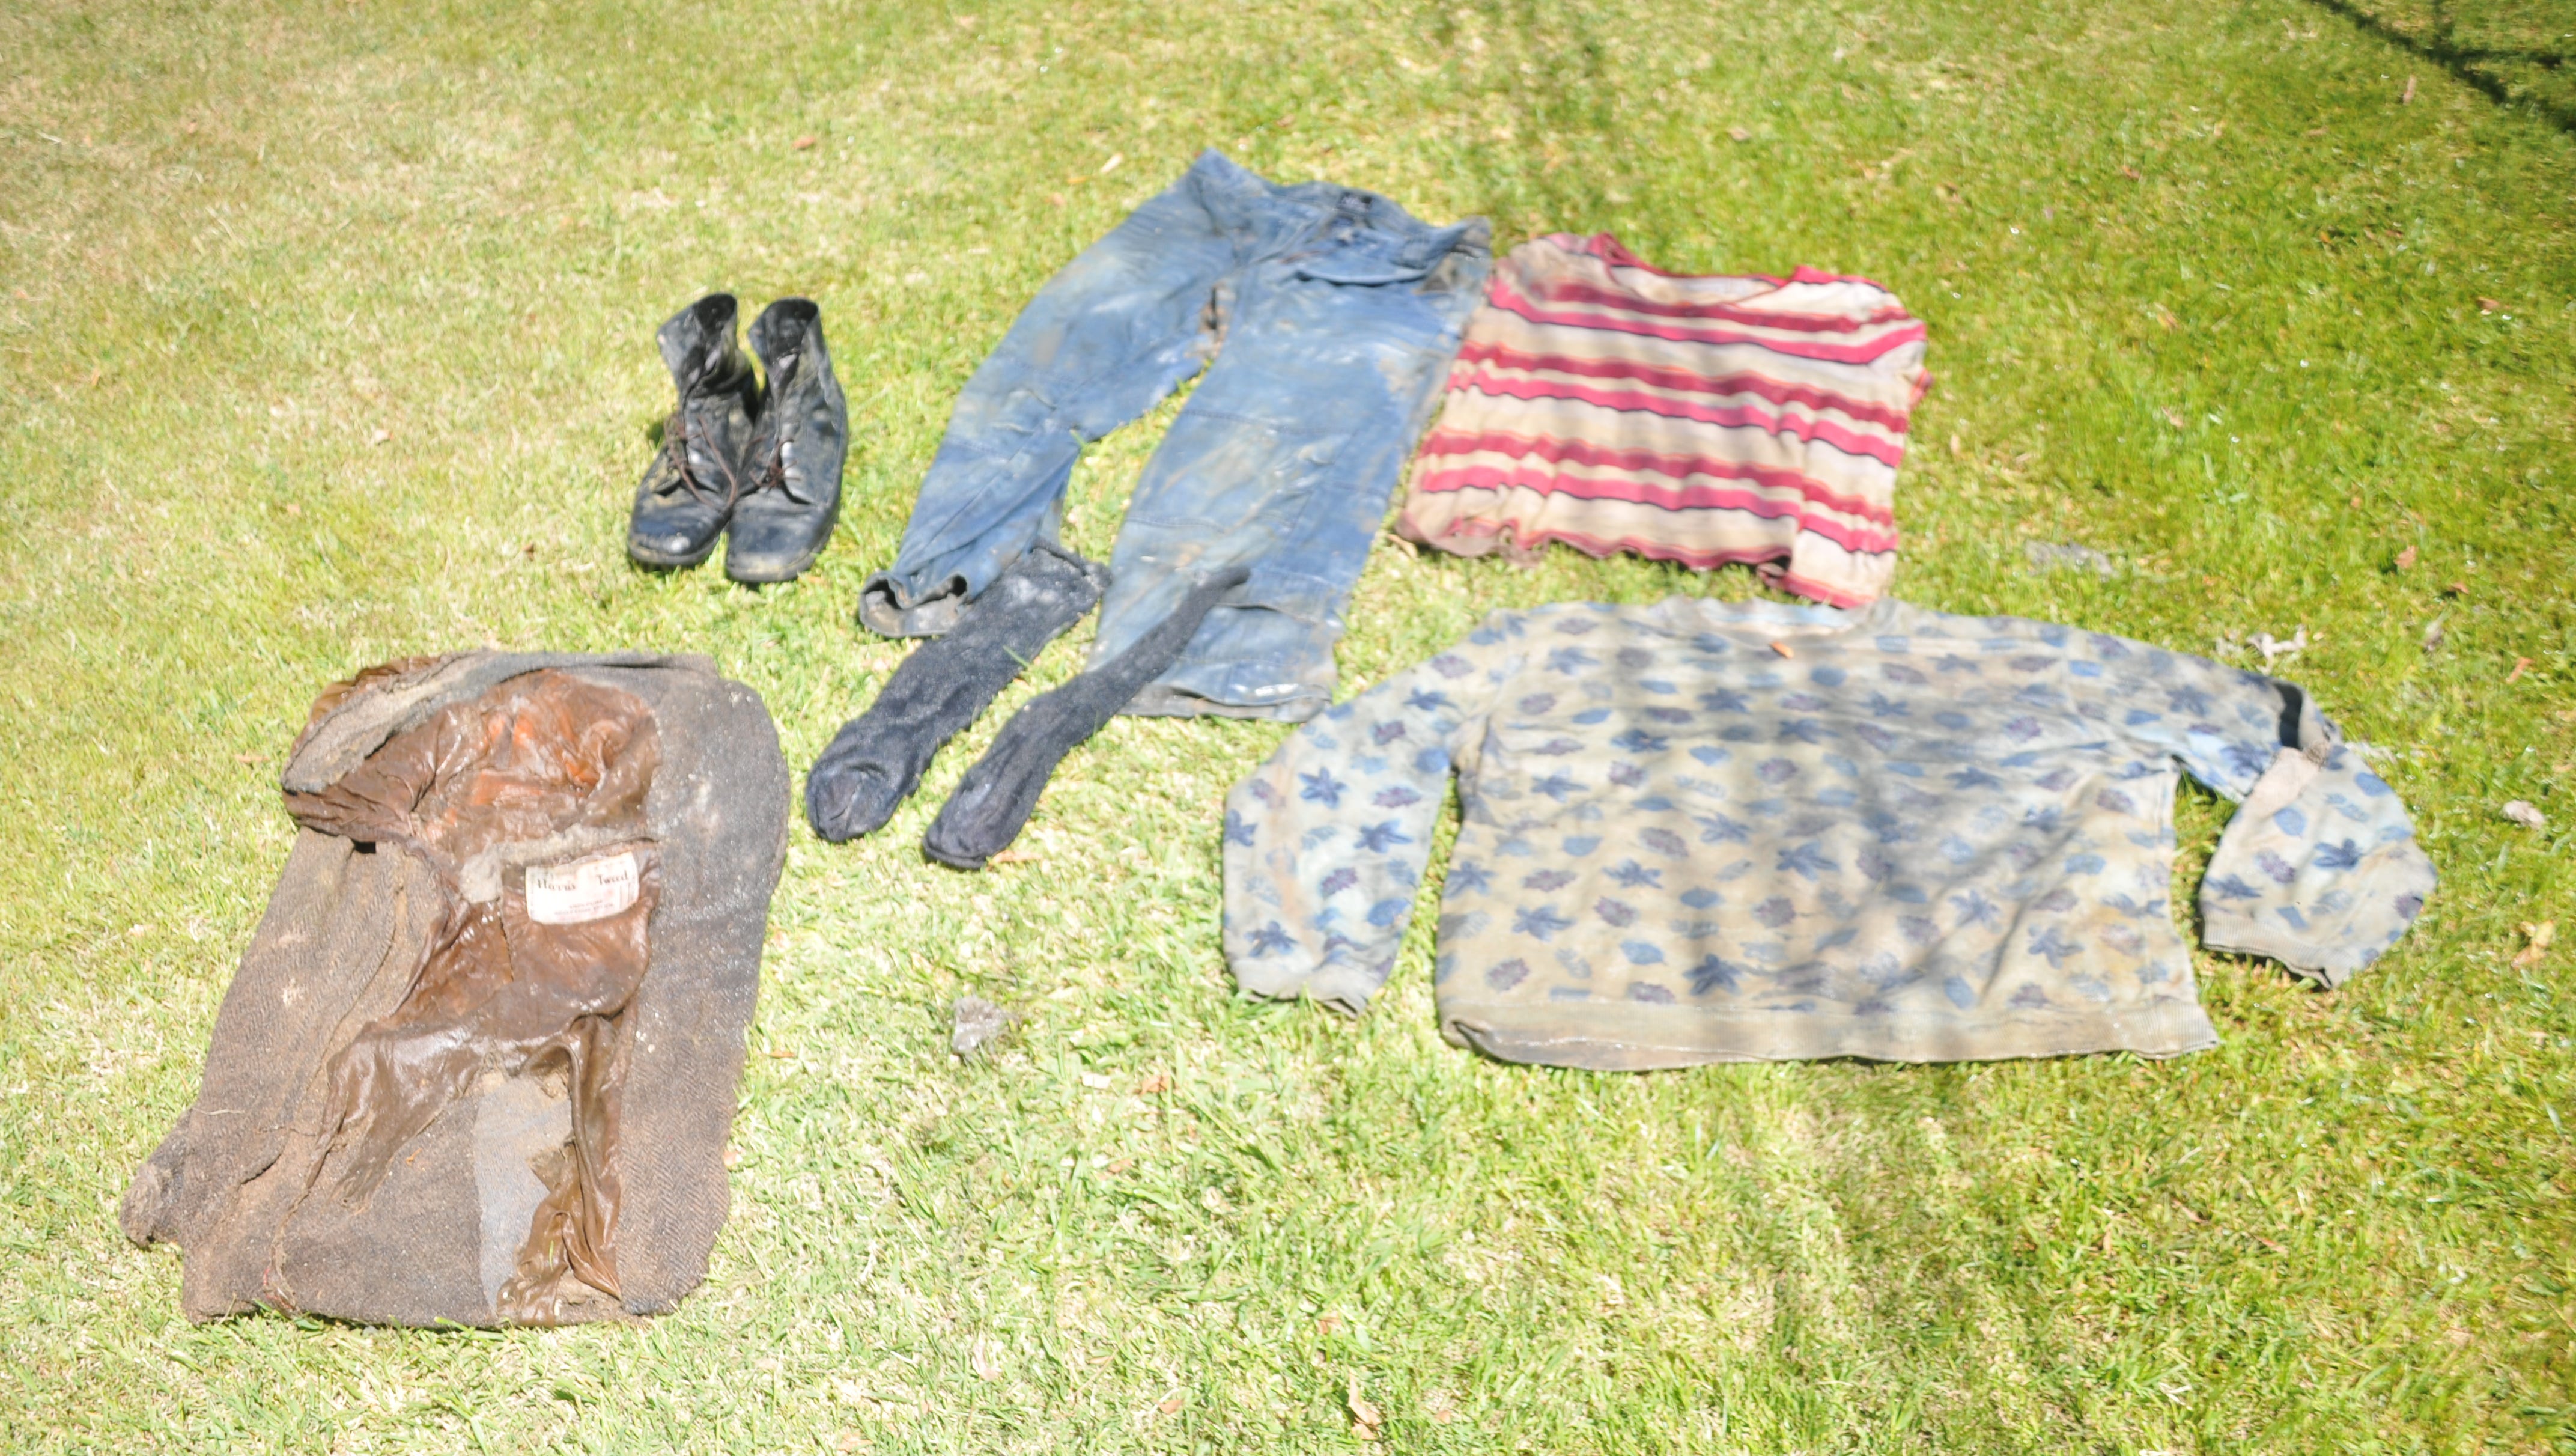 Clothing found on the body of a Latino man located in the New River in Calexico on April 2, 2012. Photo from John Doe Case #12-068.